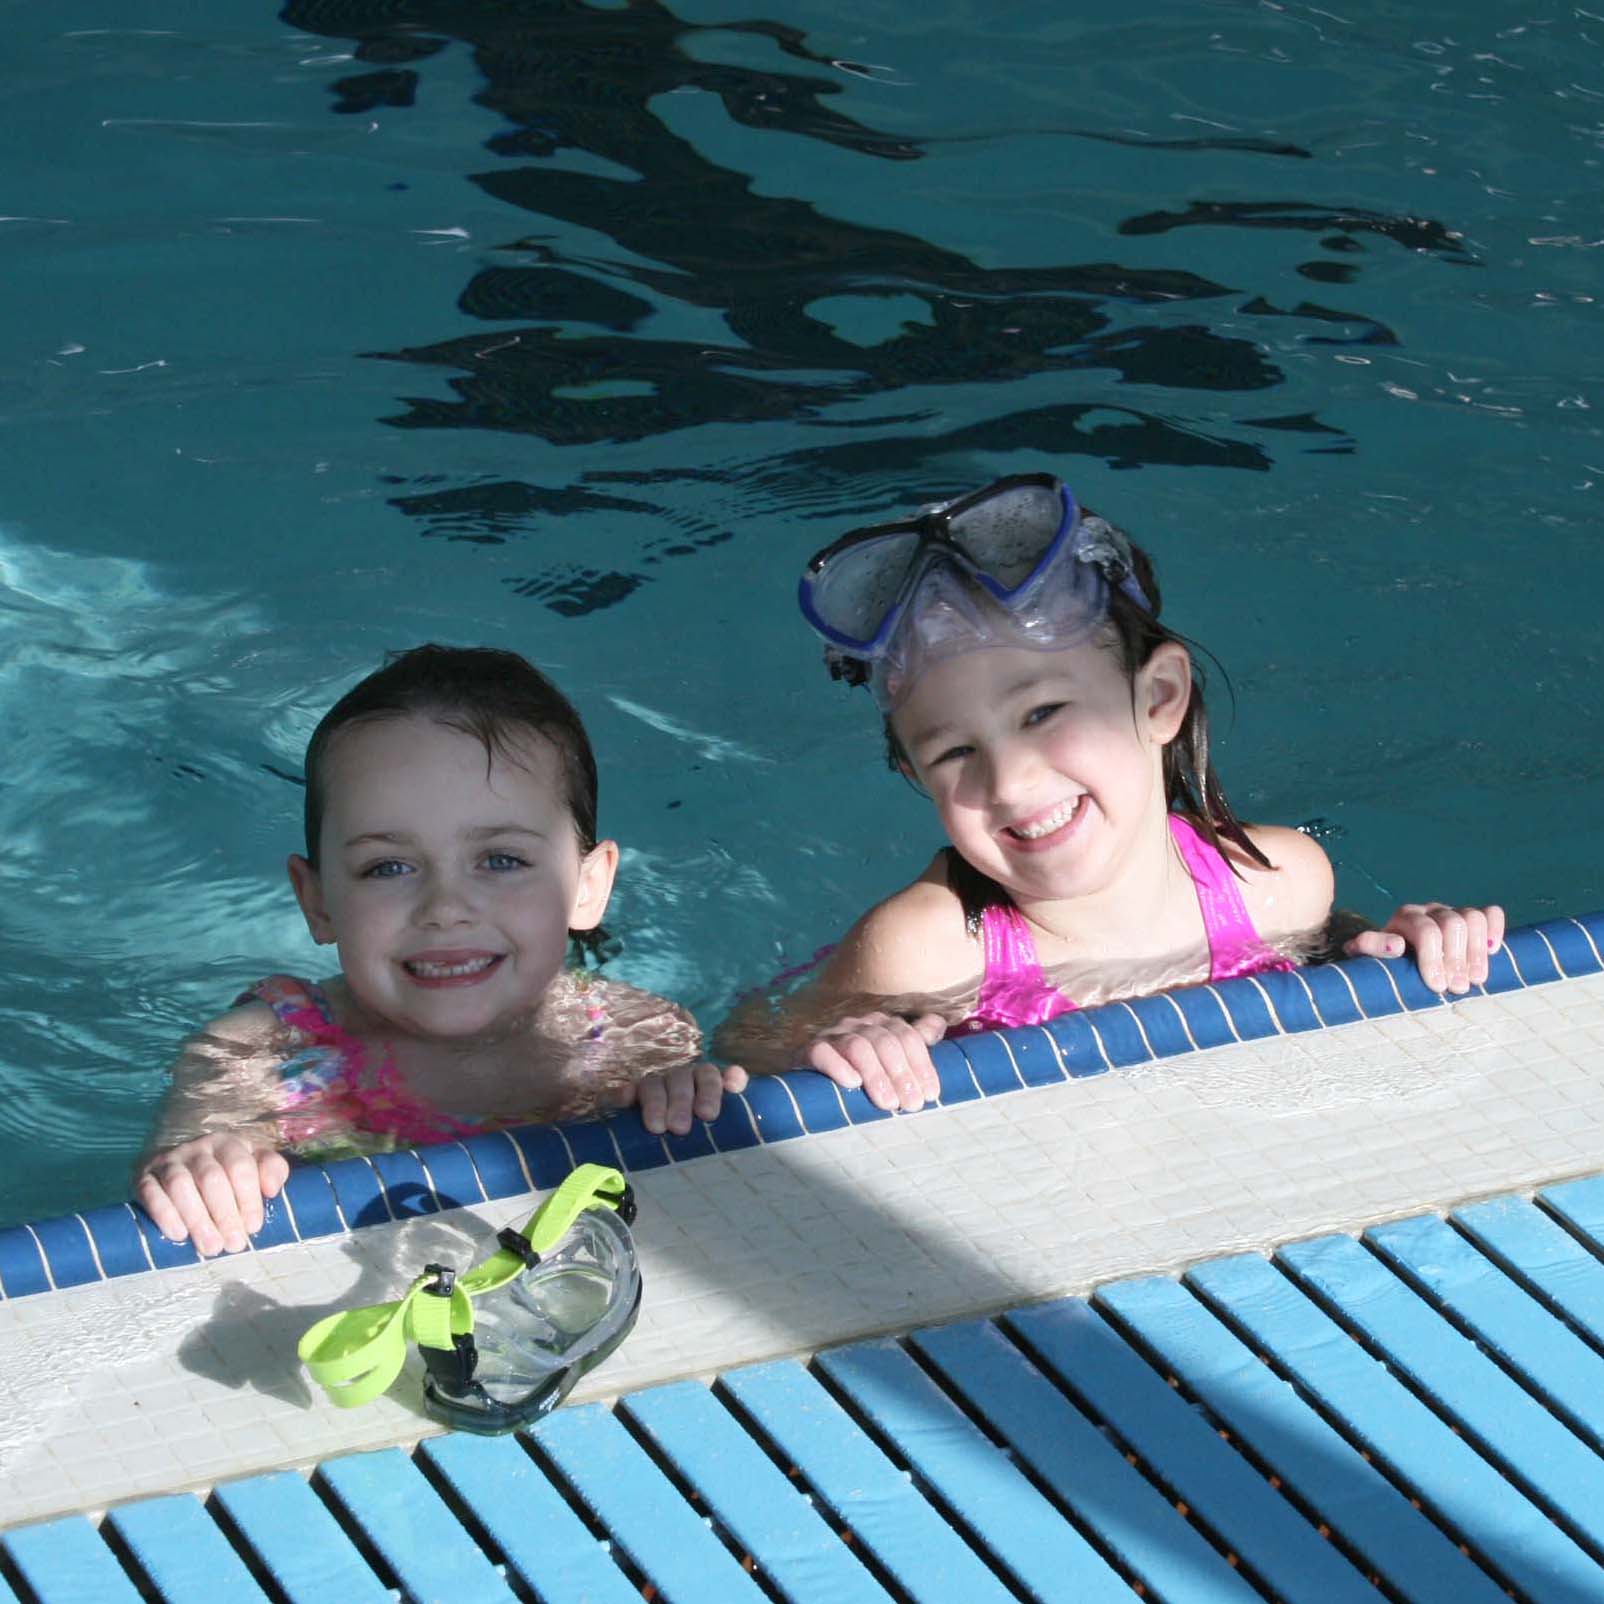 Two children in the water at the edge of the Centre pool smiling